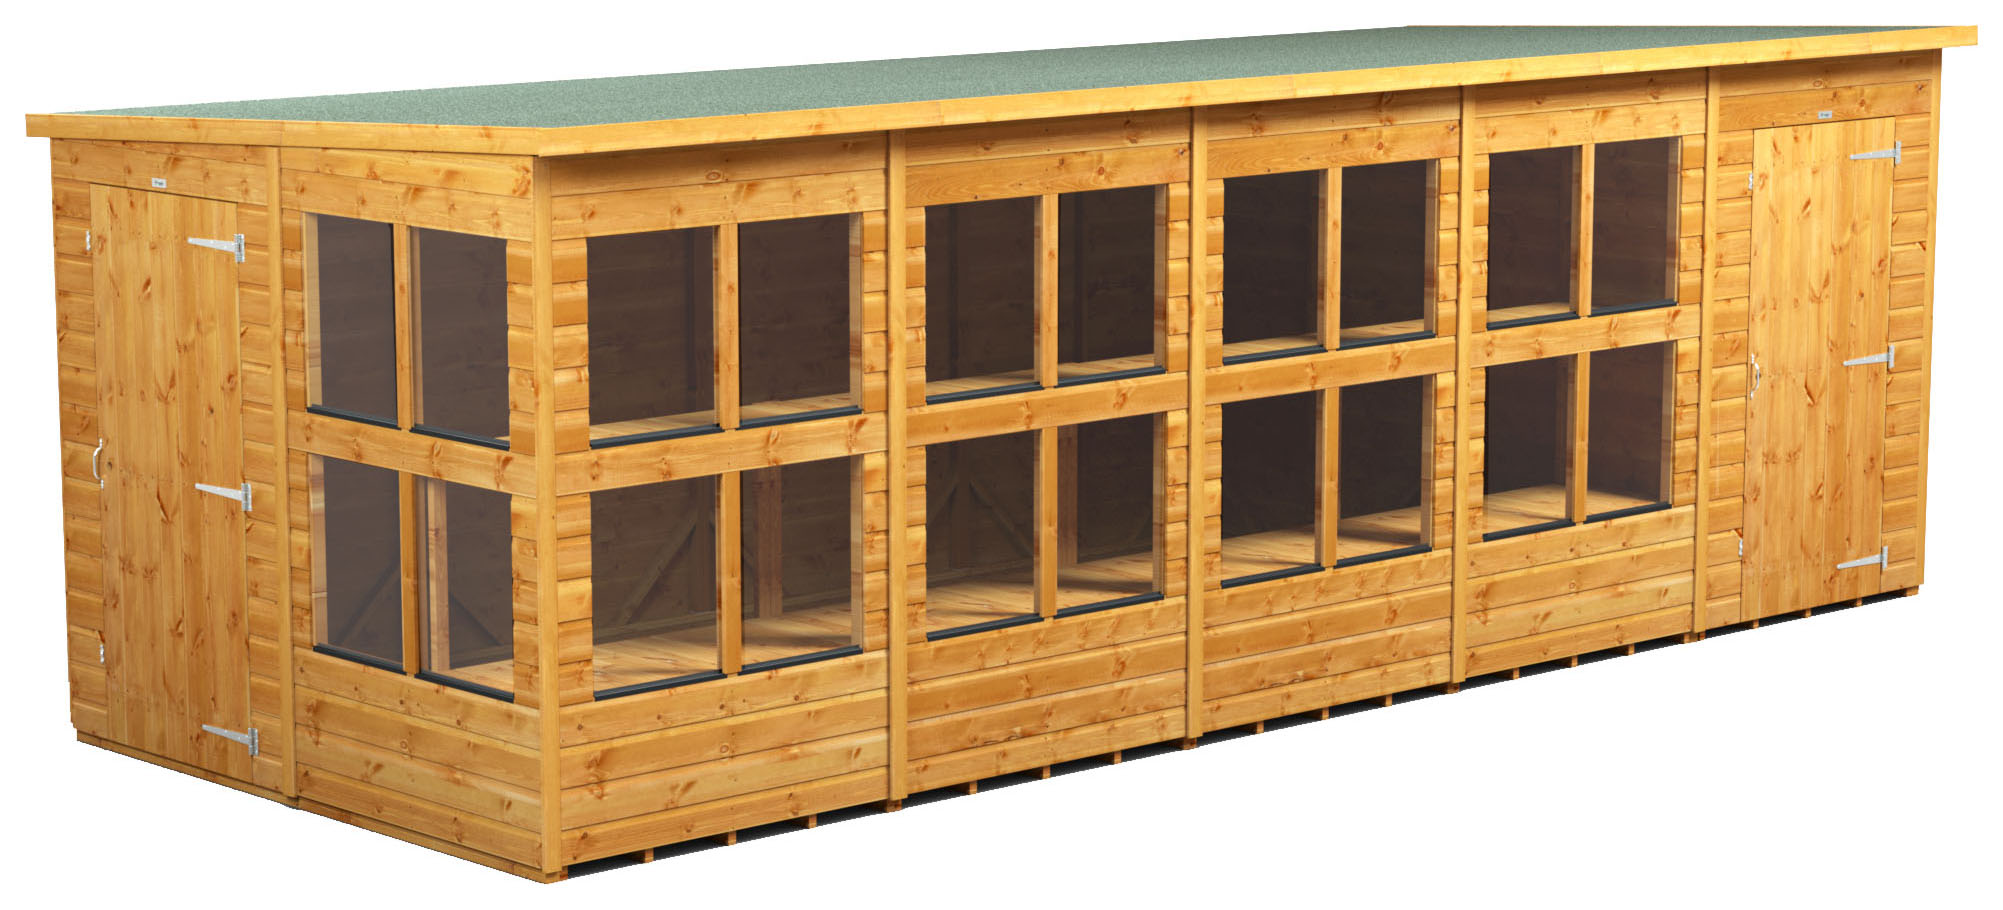 Power Sheds 20 x 8ft Pent Shiplap Dip Treated Potting Shed - Including Side Store